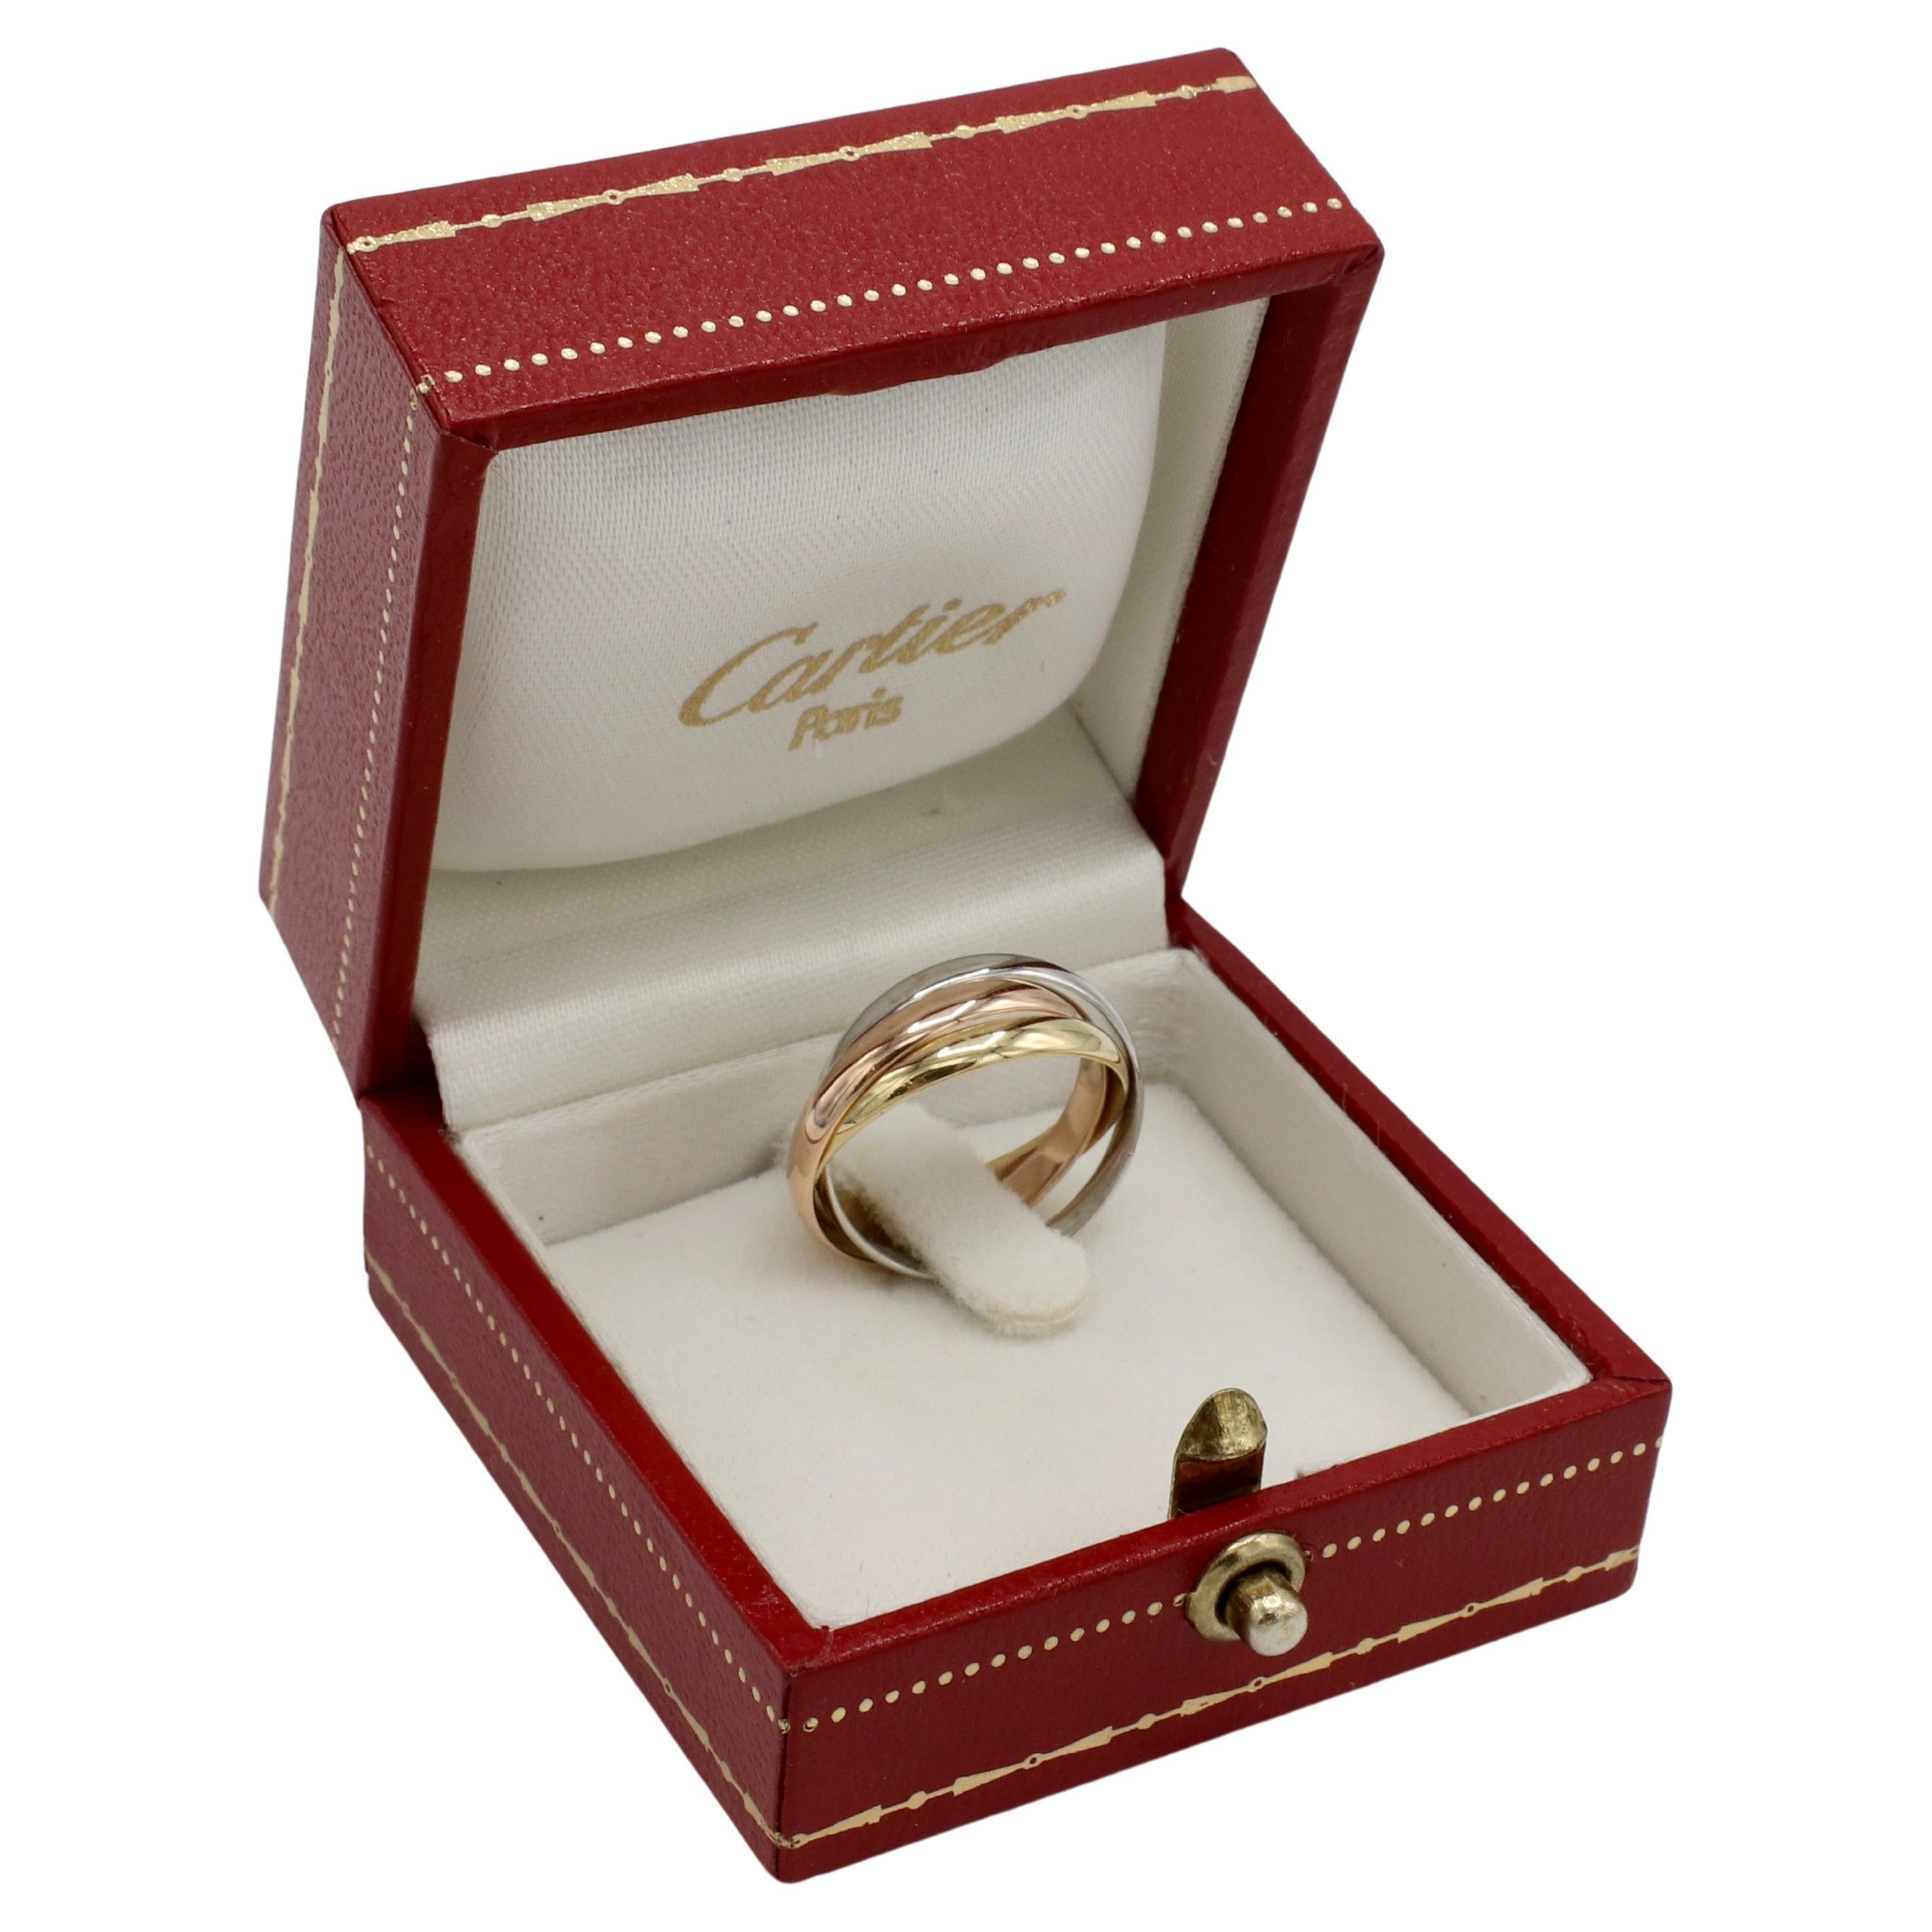 Cartier Vintage 18 Karat Yellow Gold Tri-Color Trinity Rolling Band Ring 
Metal: 18 karat yellow, white & rose gold
Band with: 2.5mm each, approx. 3.5 - 7.5 stacked
Size: 50 (5.25 US)
Signed: 750 Cartier 50 AJ315
Weight: 3.95 grams